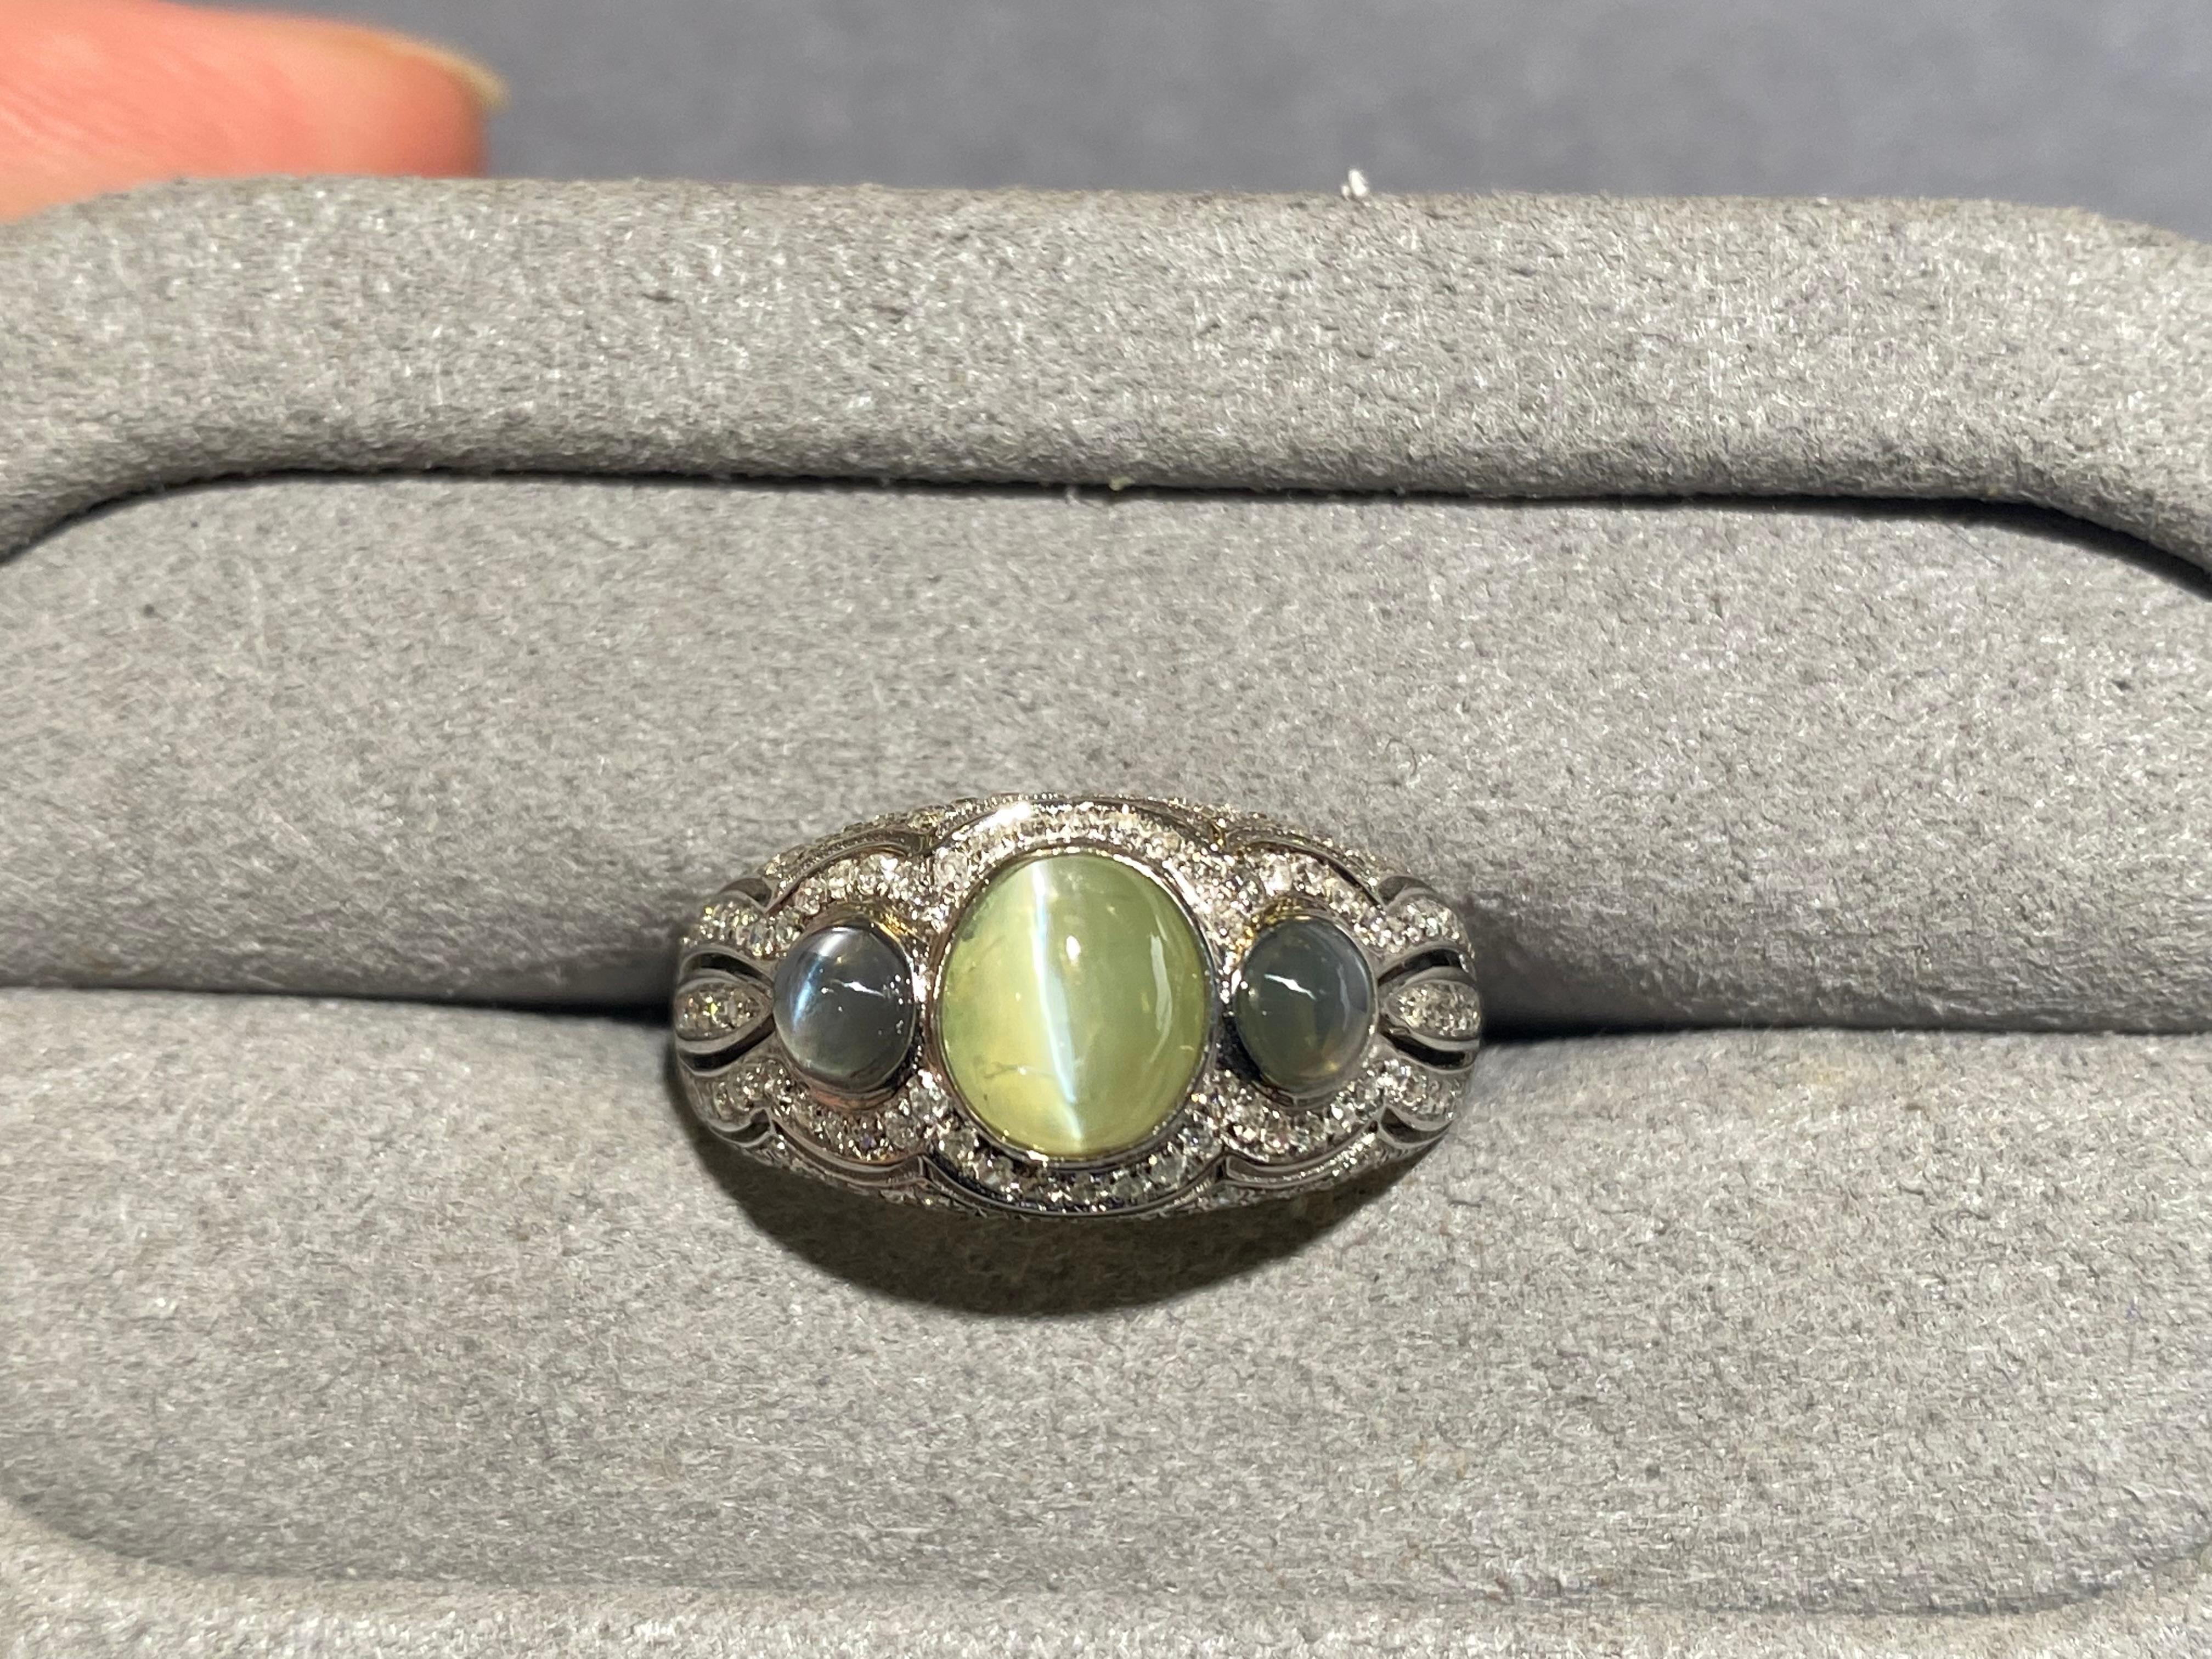 A 1.9 ct Chrysoberyl cat's eye 3-stones ring with Alexandrite cat's eye and diamond. The chrysoberyl cabochon is set in the middle of 2 alexandrite. The 3 stones are surrounded by micro diamond pave. The chrysoberyl has clear and sharp chatoyancy